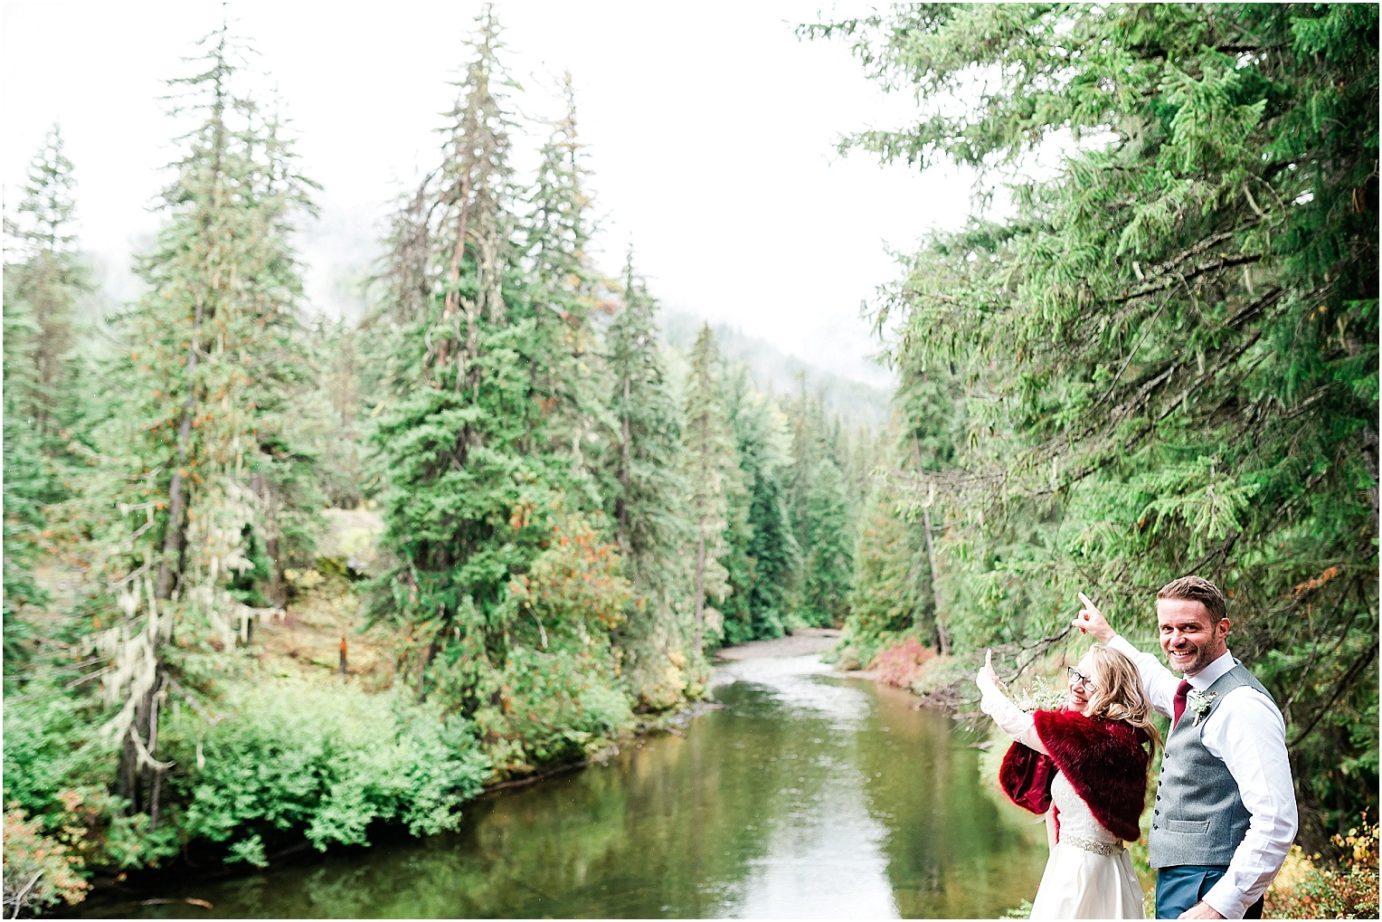 Intimate Leavenworth Elopement Rick and Tracey Leavenworth Photographer snow in the mountains